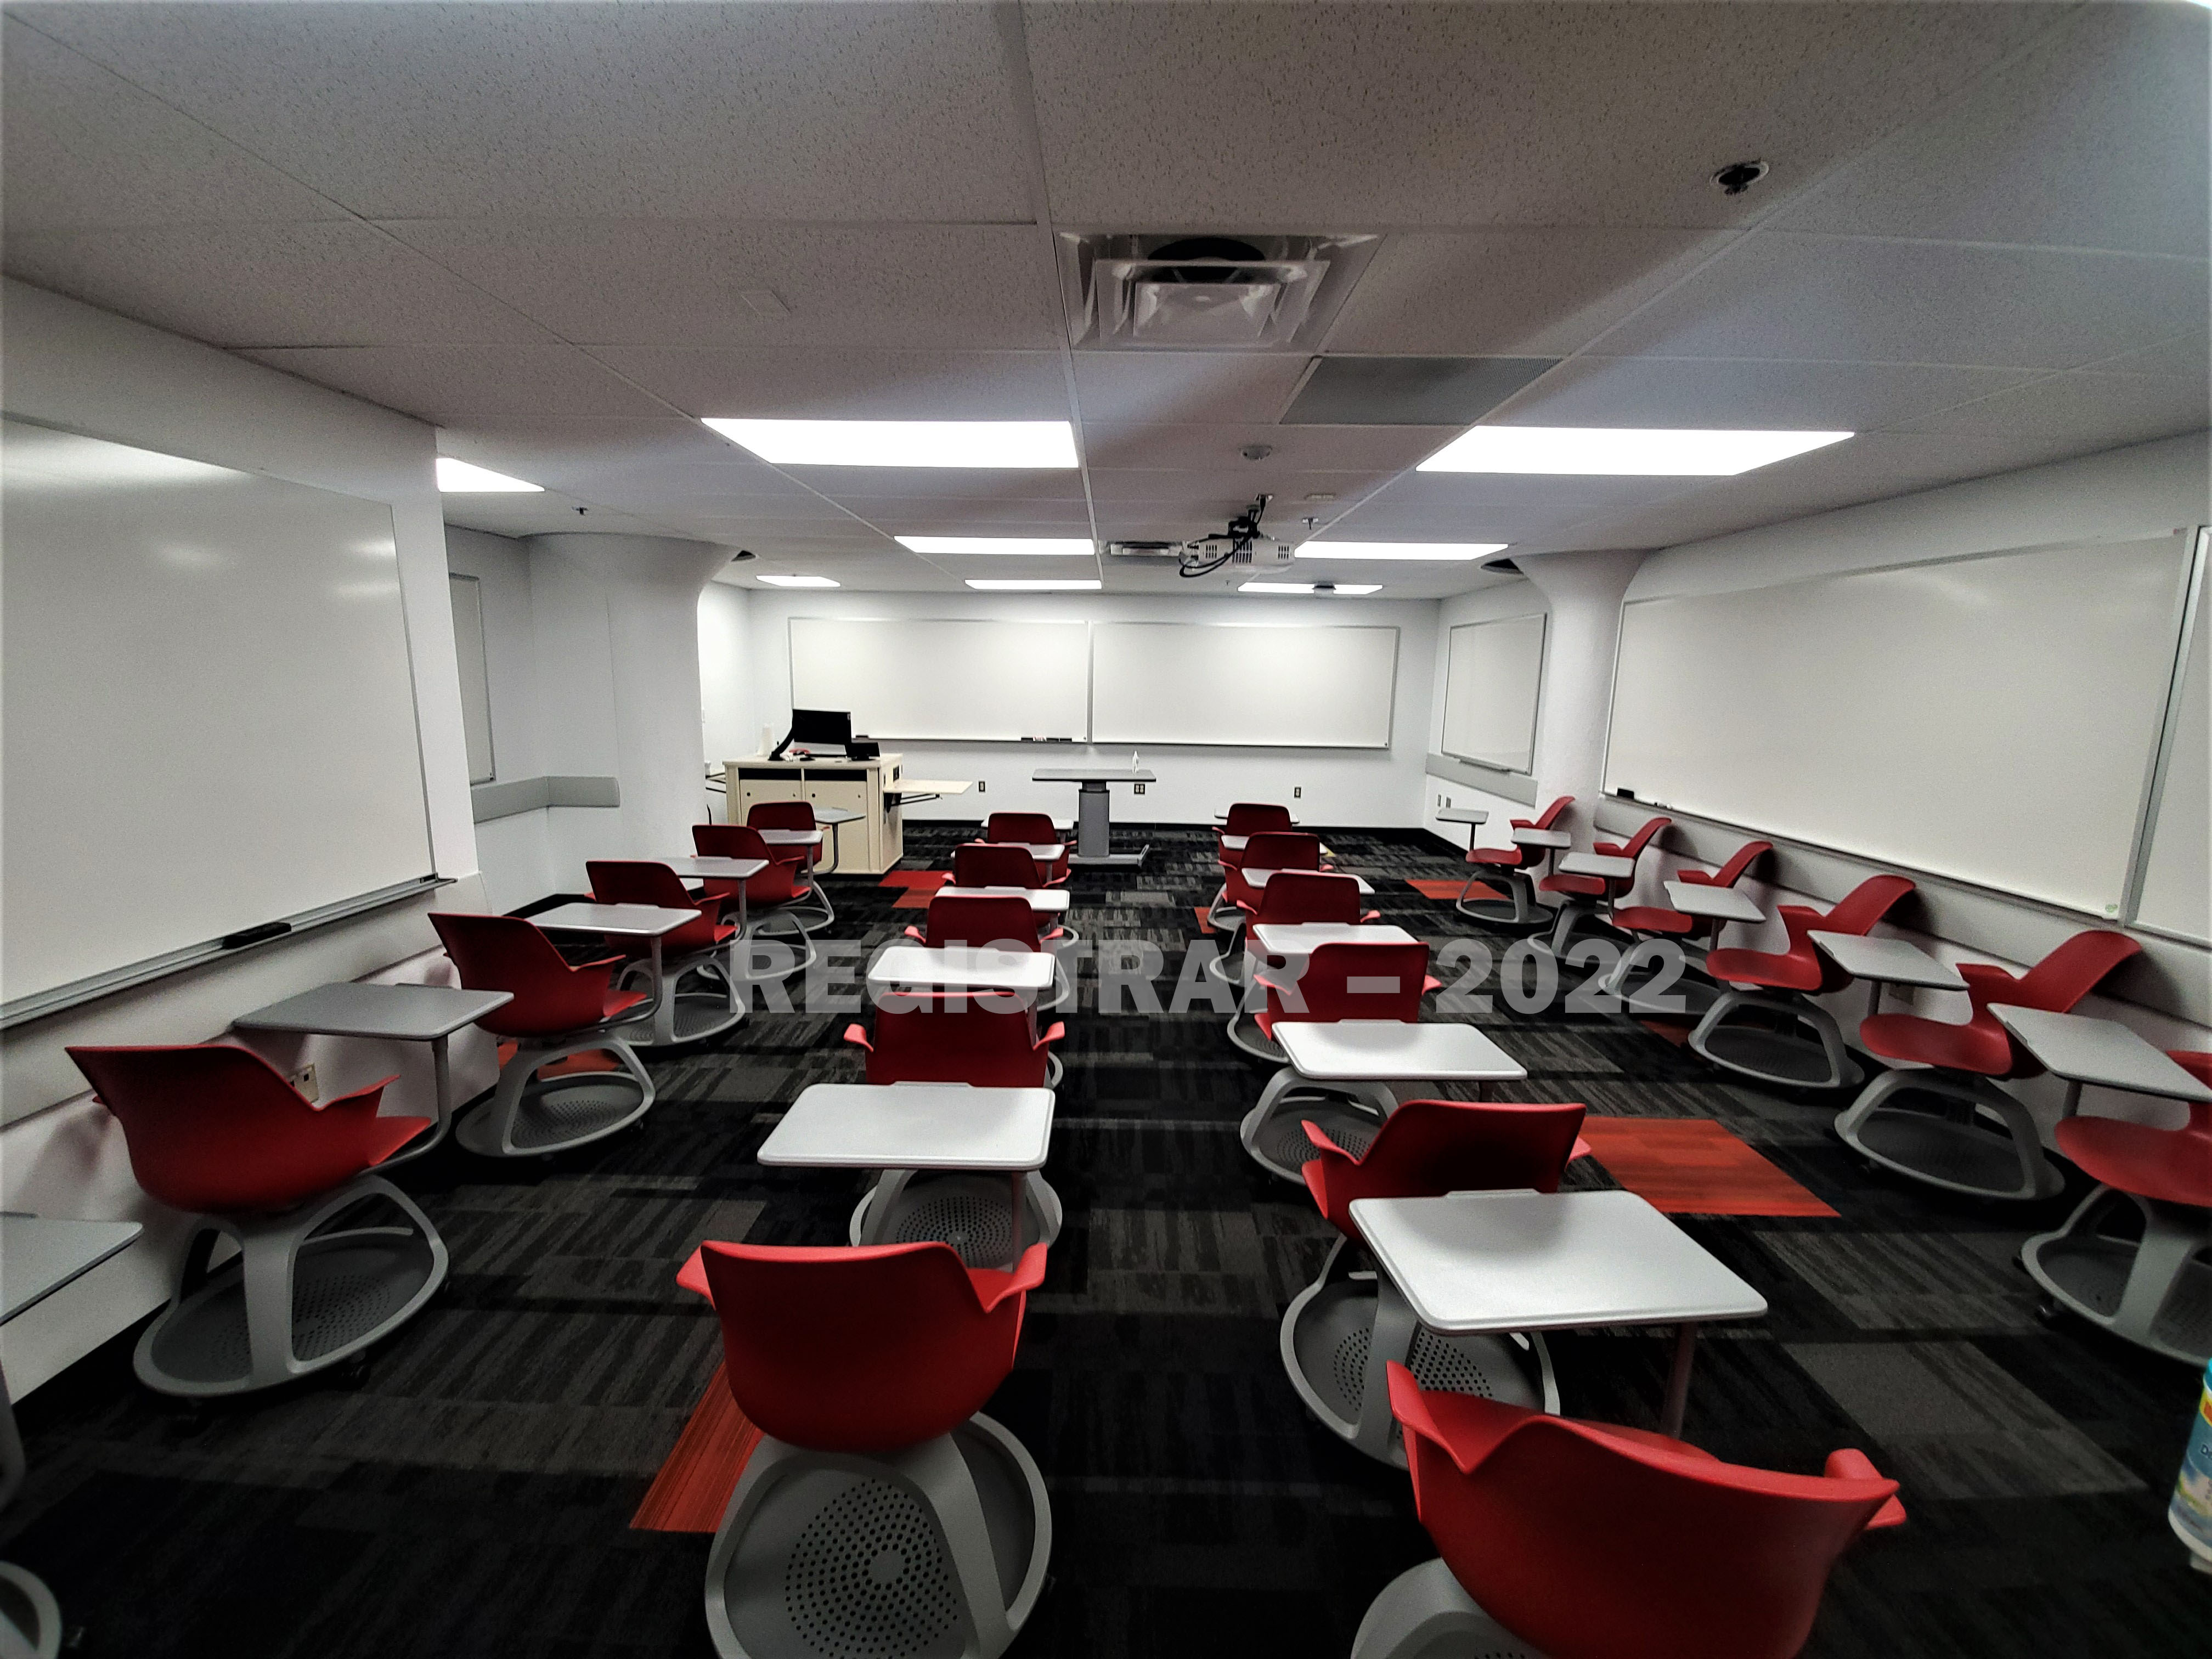 Enarson Classroom Building room 15 ultra wide angle view from the back of the room